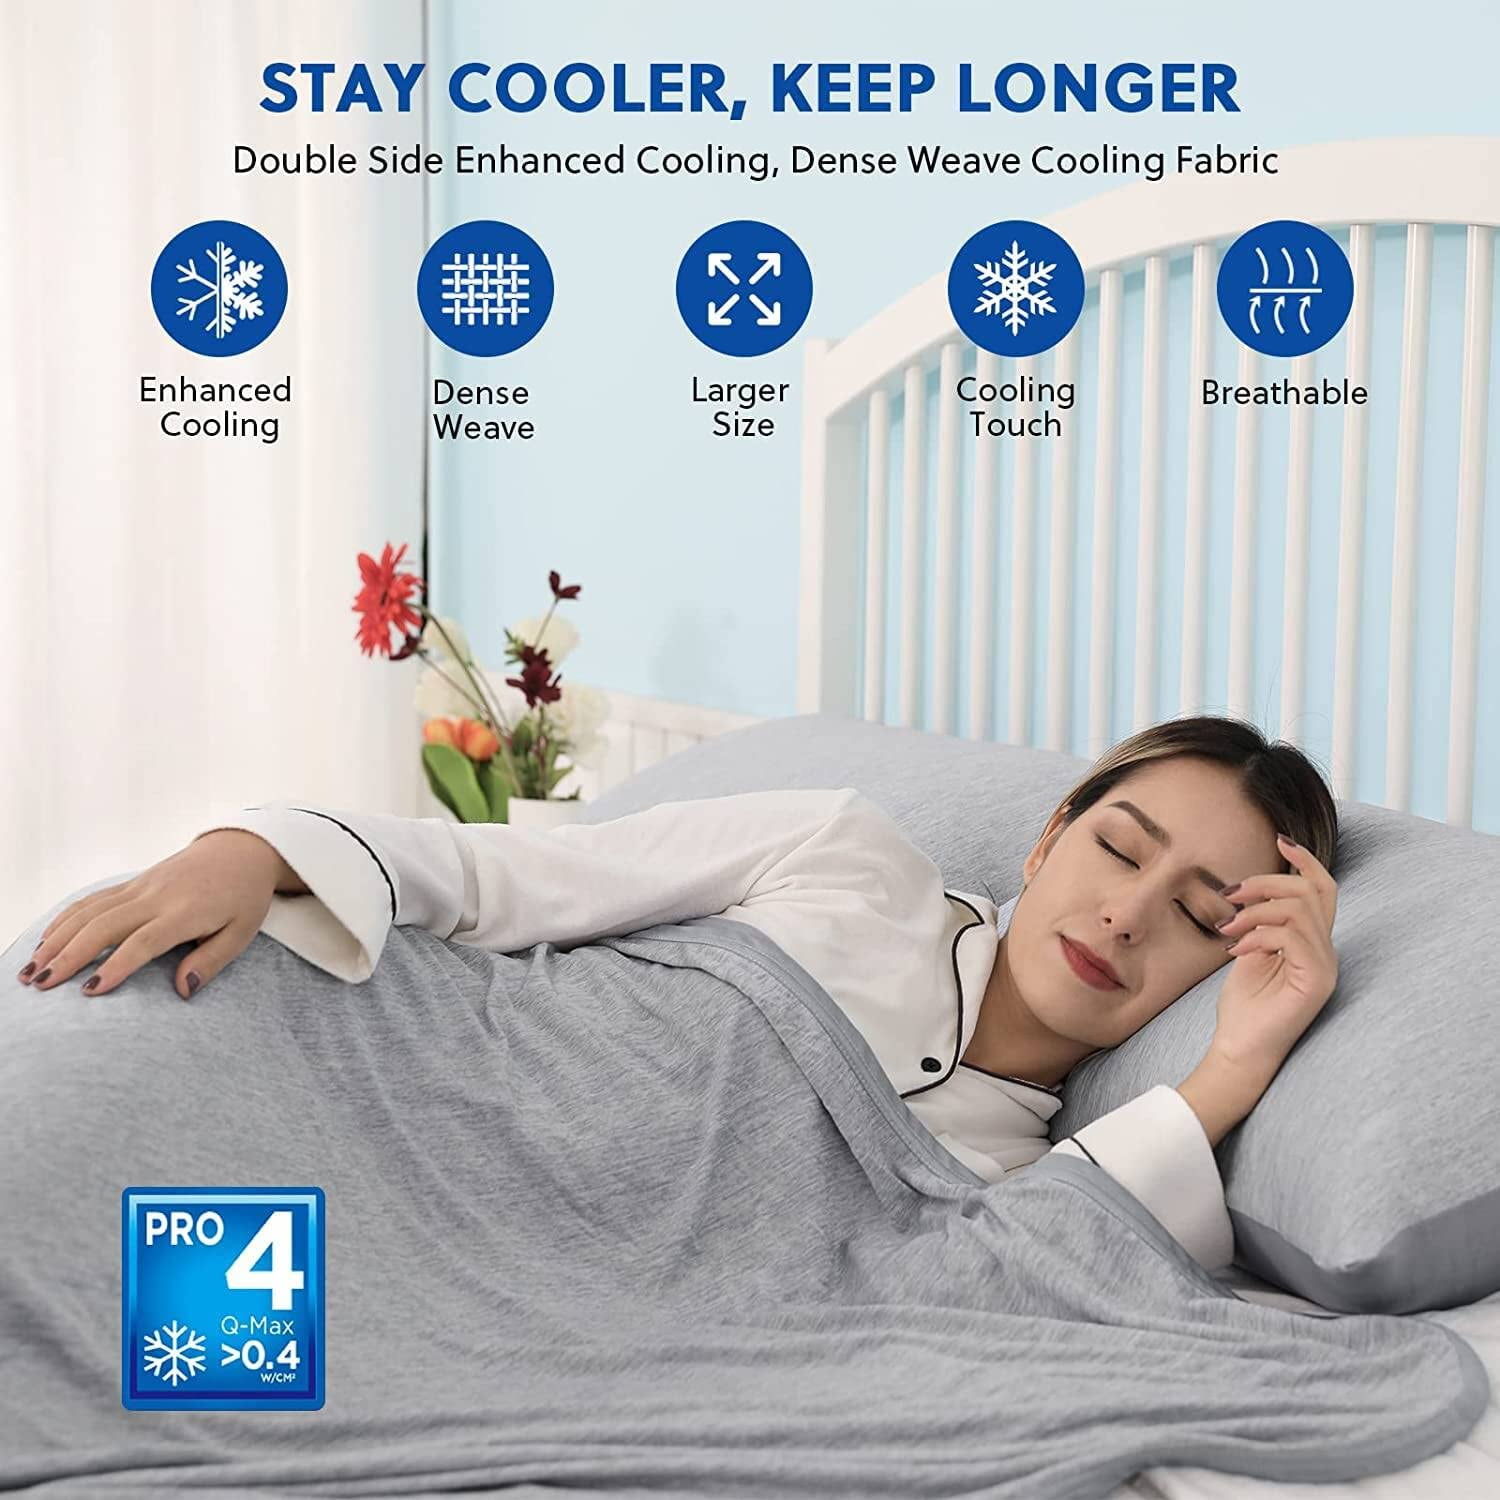 Cooling Blankets for Hot Sleepers - Summer Blanket Thin Lightweight  Breathable Soft Double Side Enhanced Cooling Blanket for Bed Couch Sofa,  Keep Cool for Night Sweats,51 x 67 